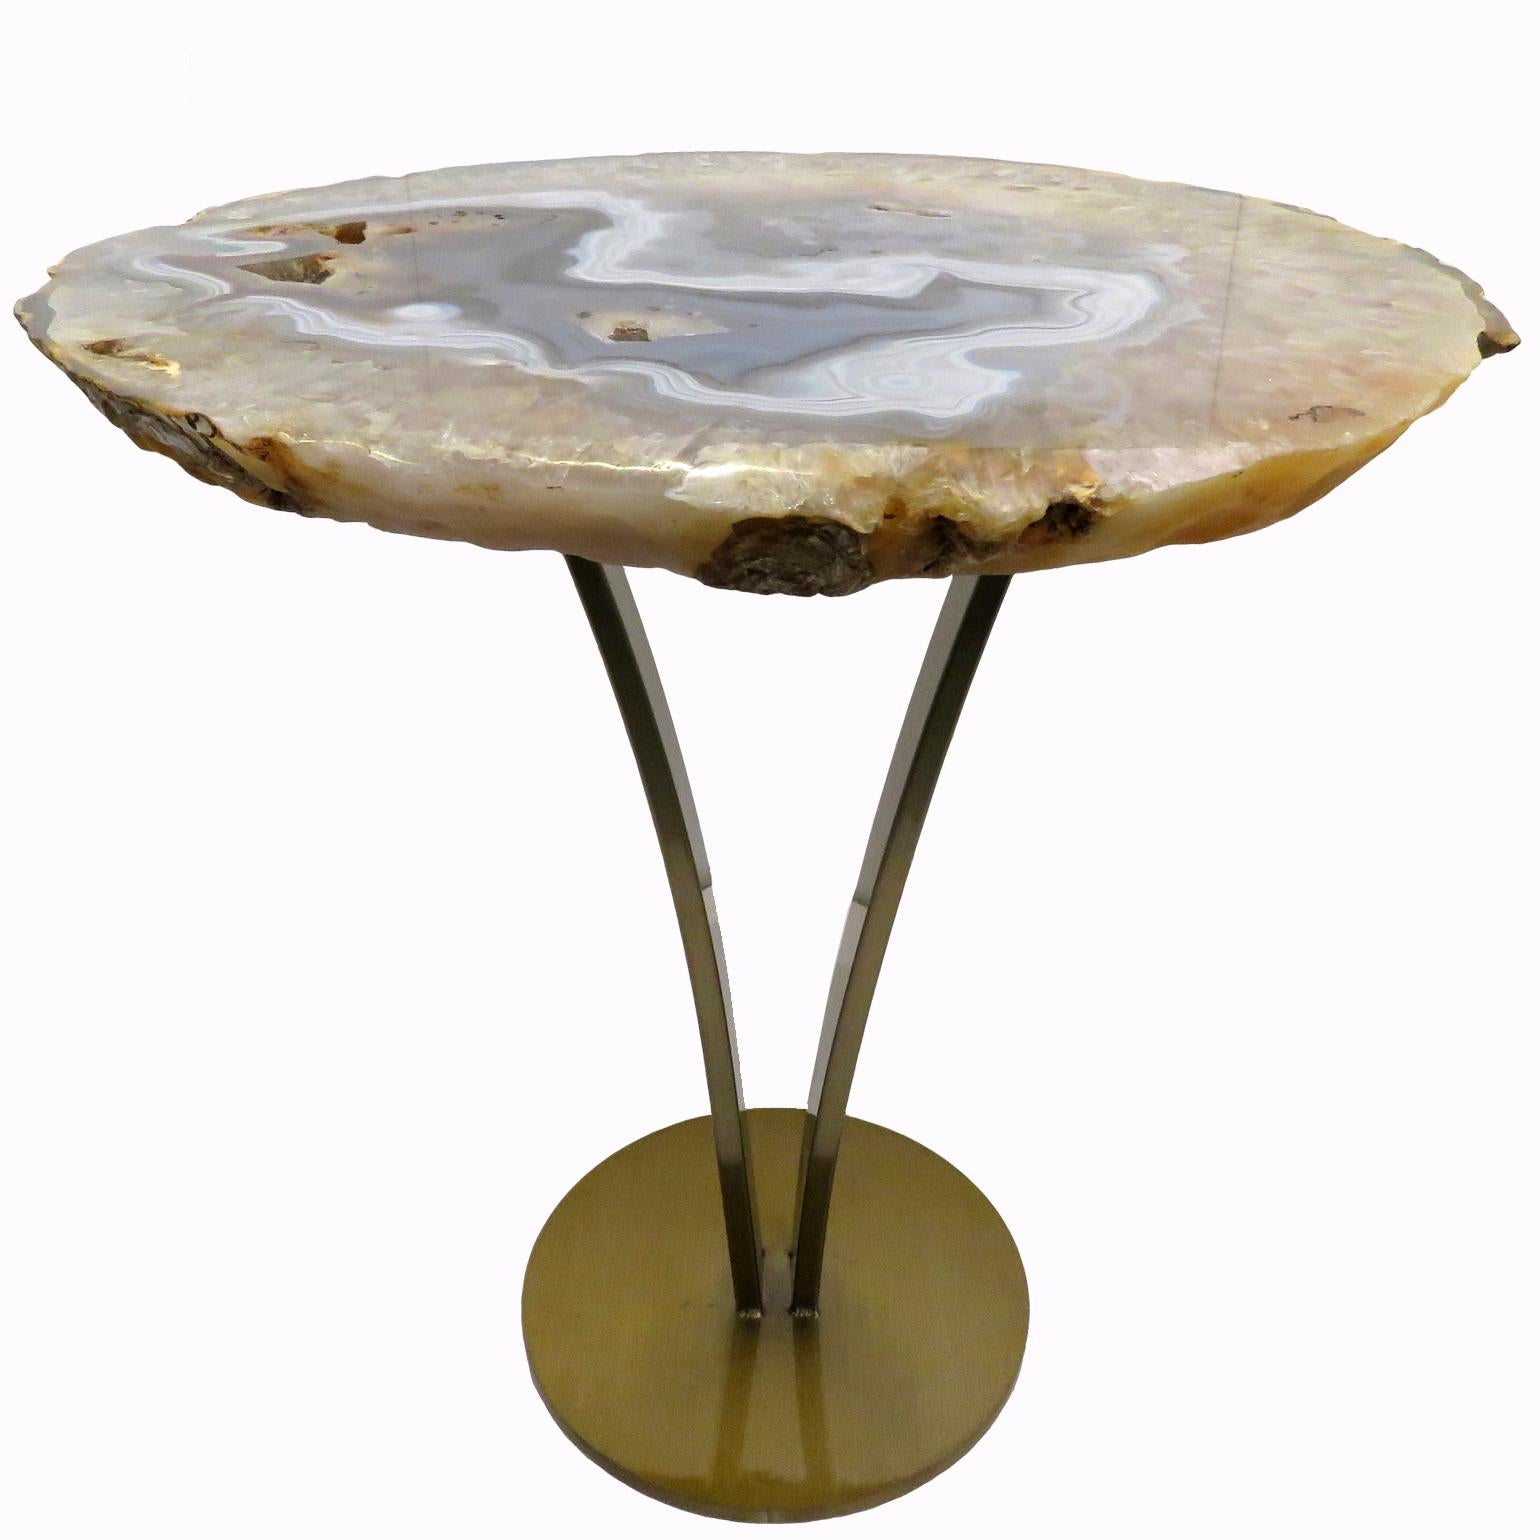 This agate slab forming a side table or cocktail table, is from Brazil and has a combination of colors with hints of beige, blue and brown. Agates are formed in rounded nodules, which are sliced open to bring out the internal pattern hidden in the